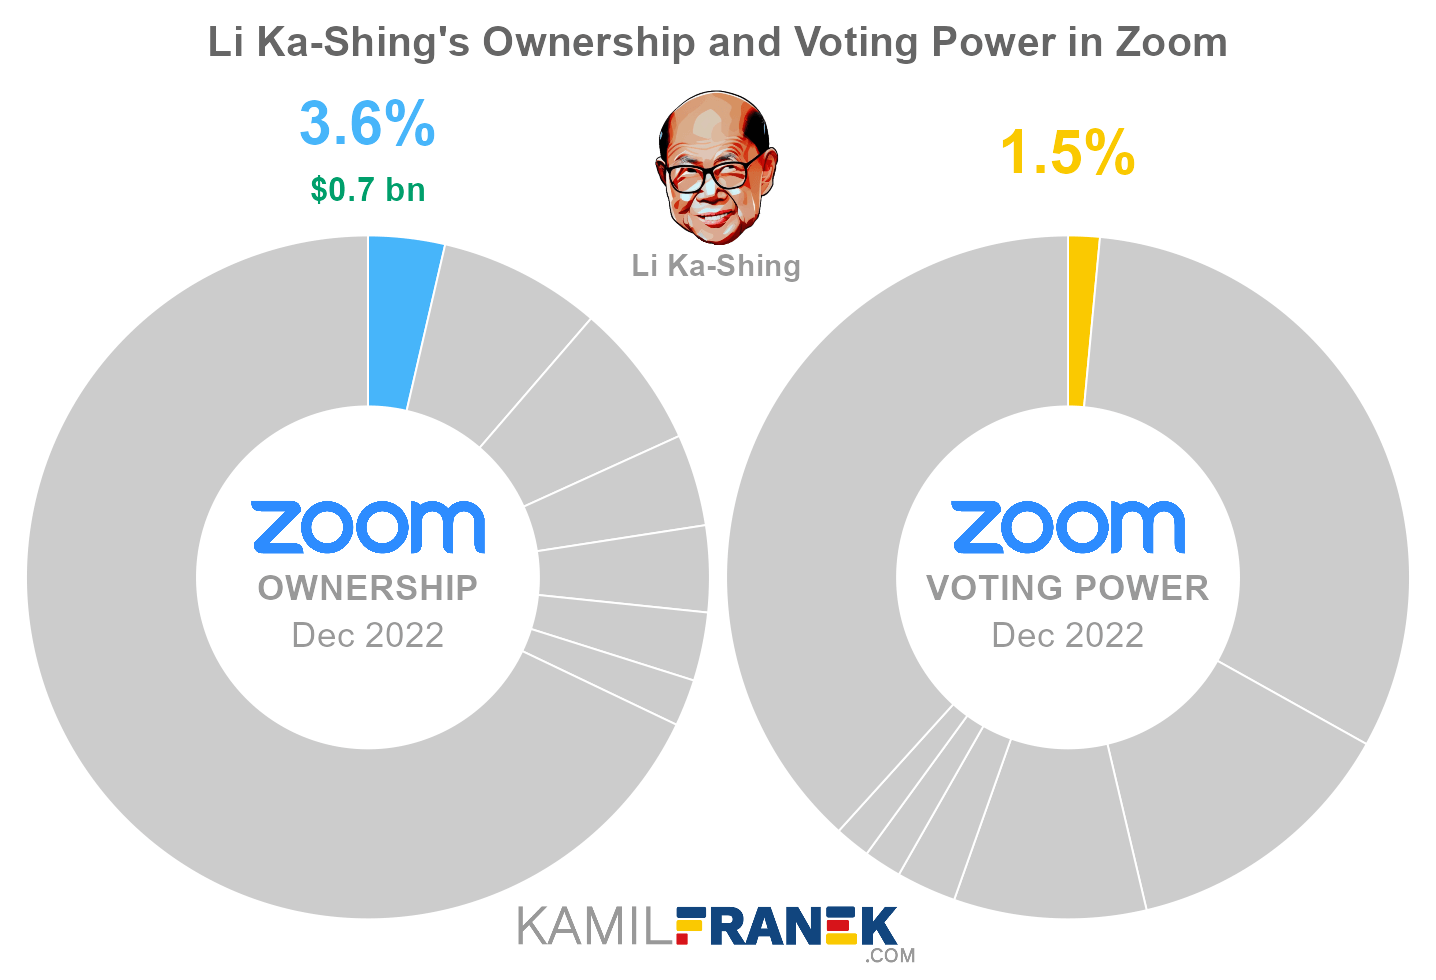 Zoom largest shareholders share ownership vs vote control chart